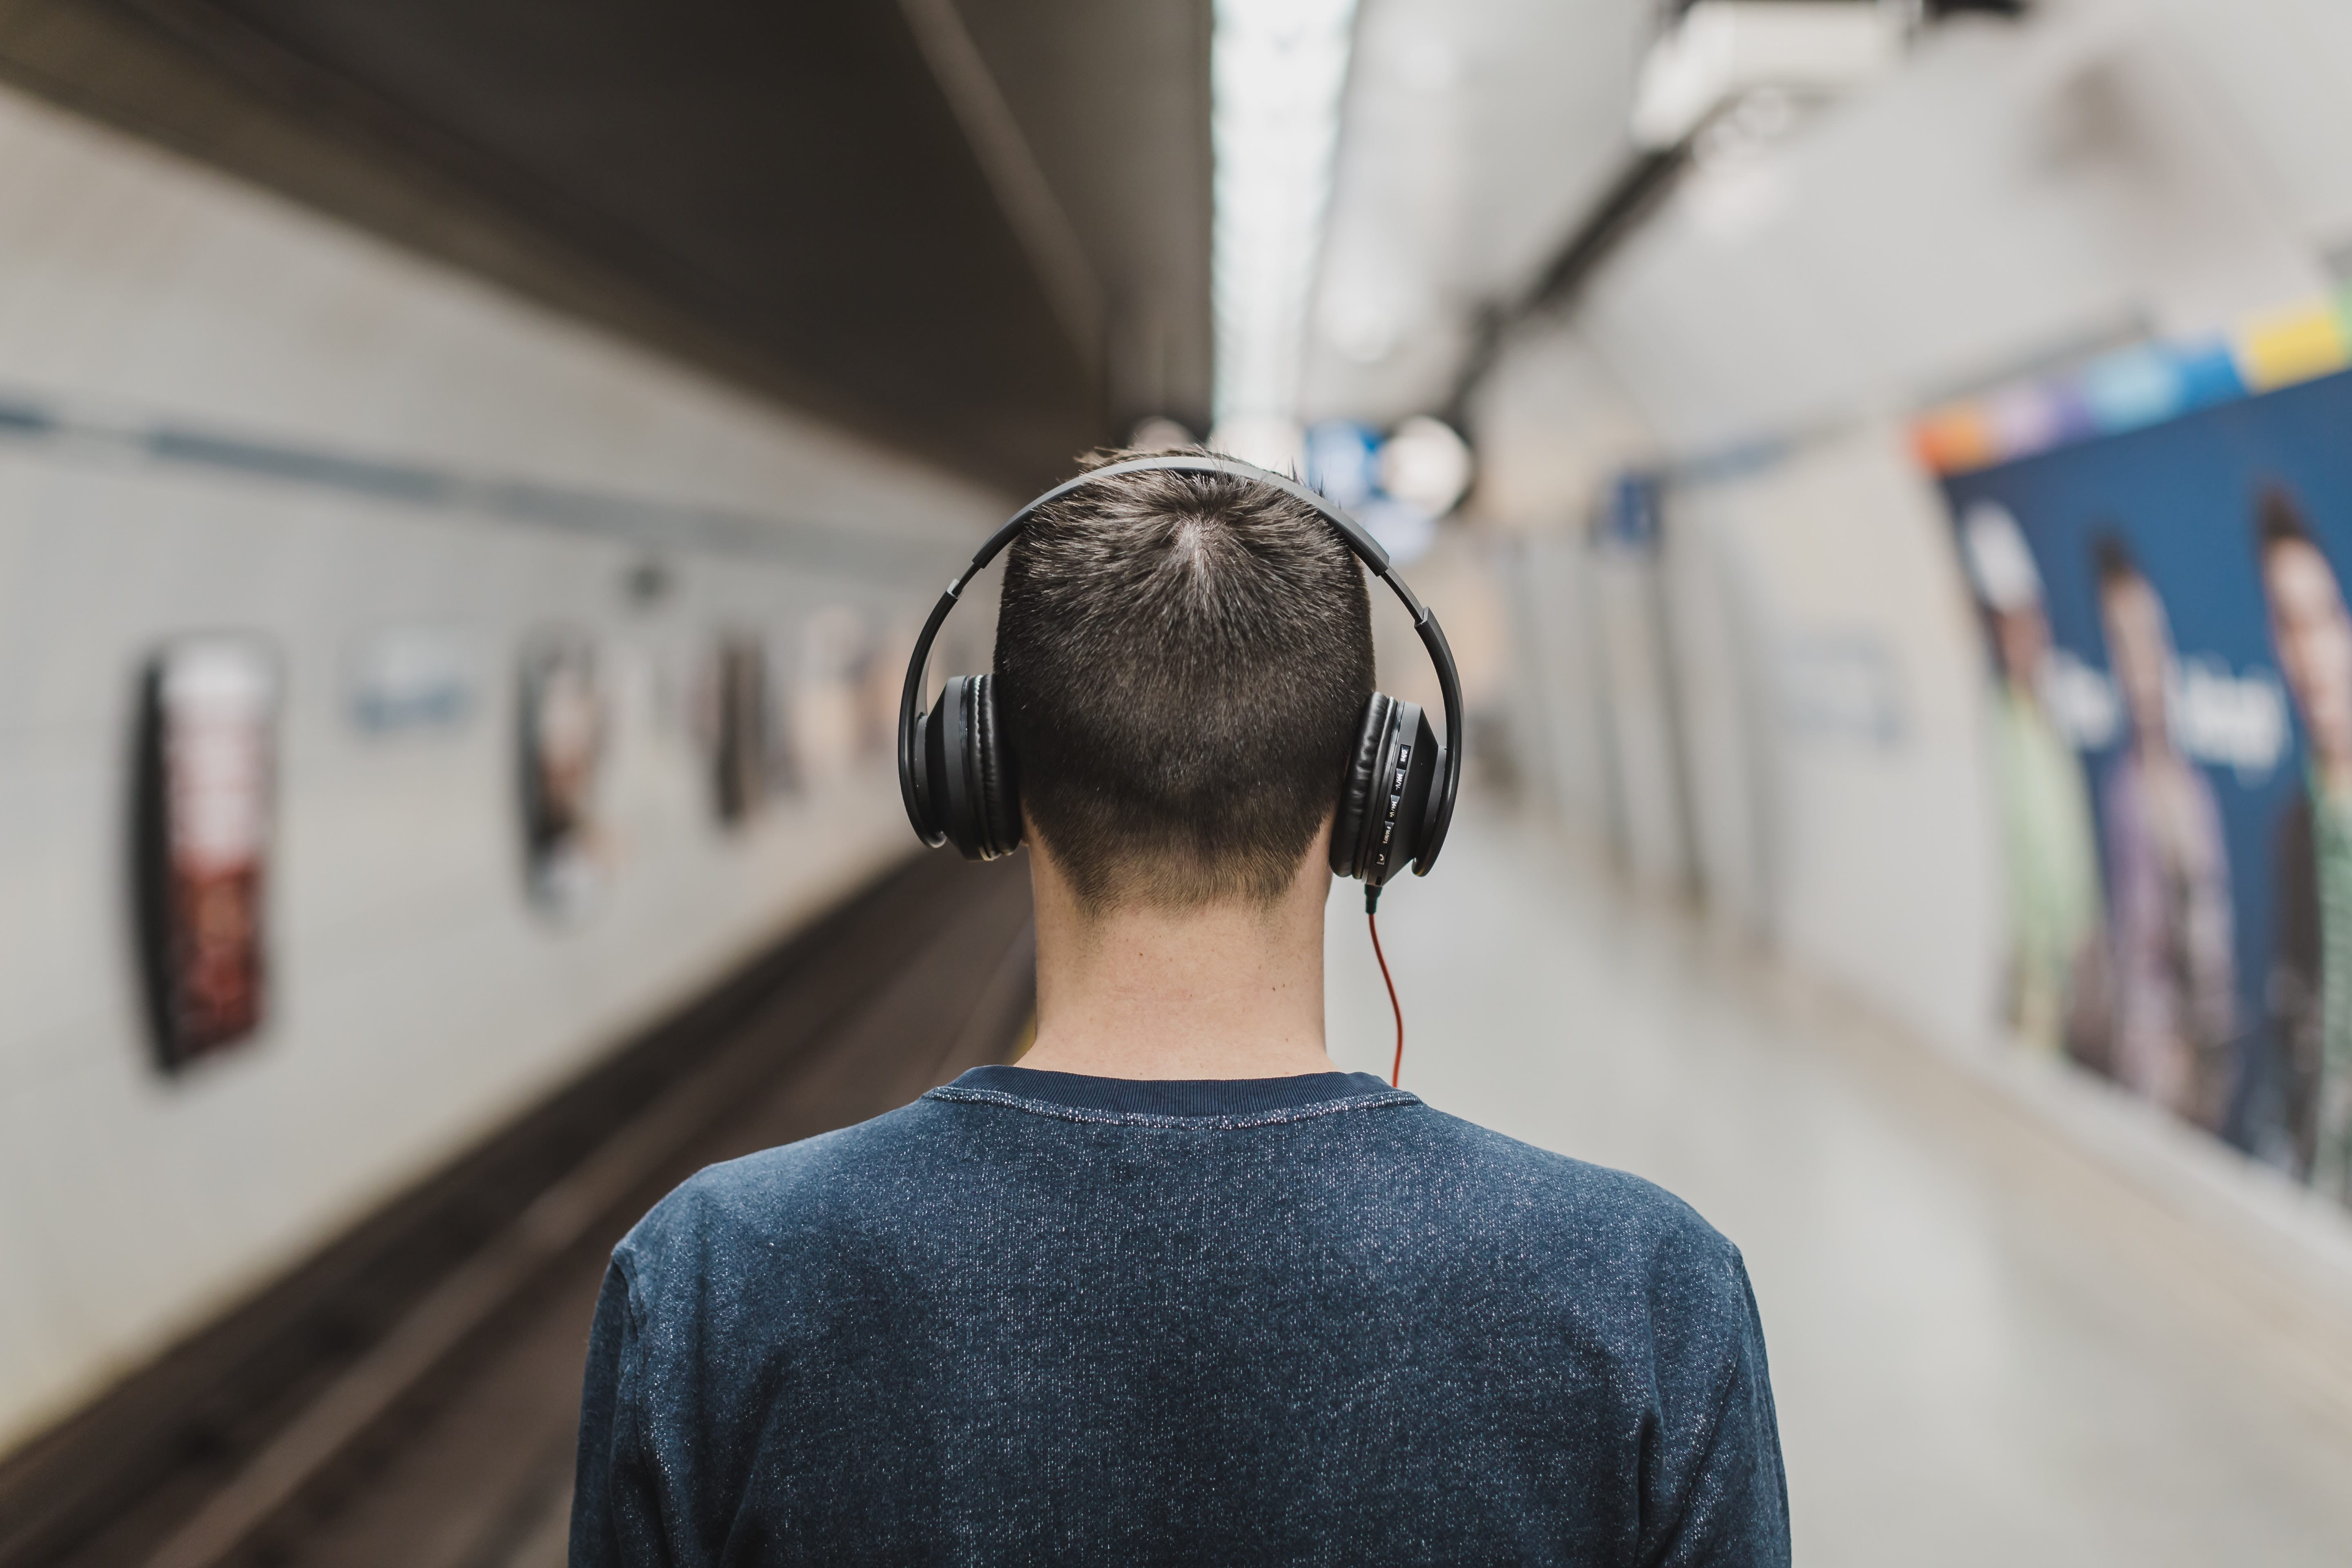 TOP 5 SERMON PODCASTS YOU SHOULD BE LISTENING TO!